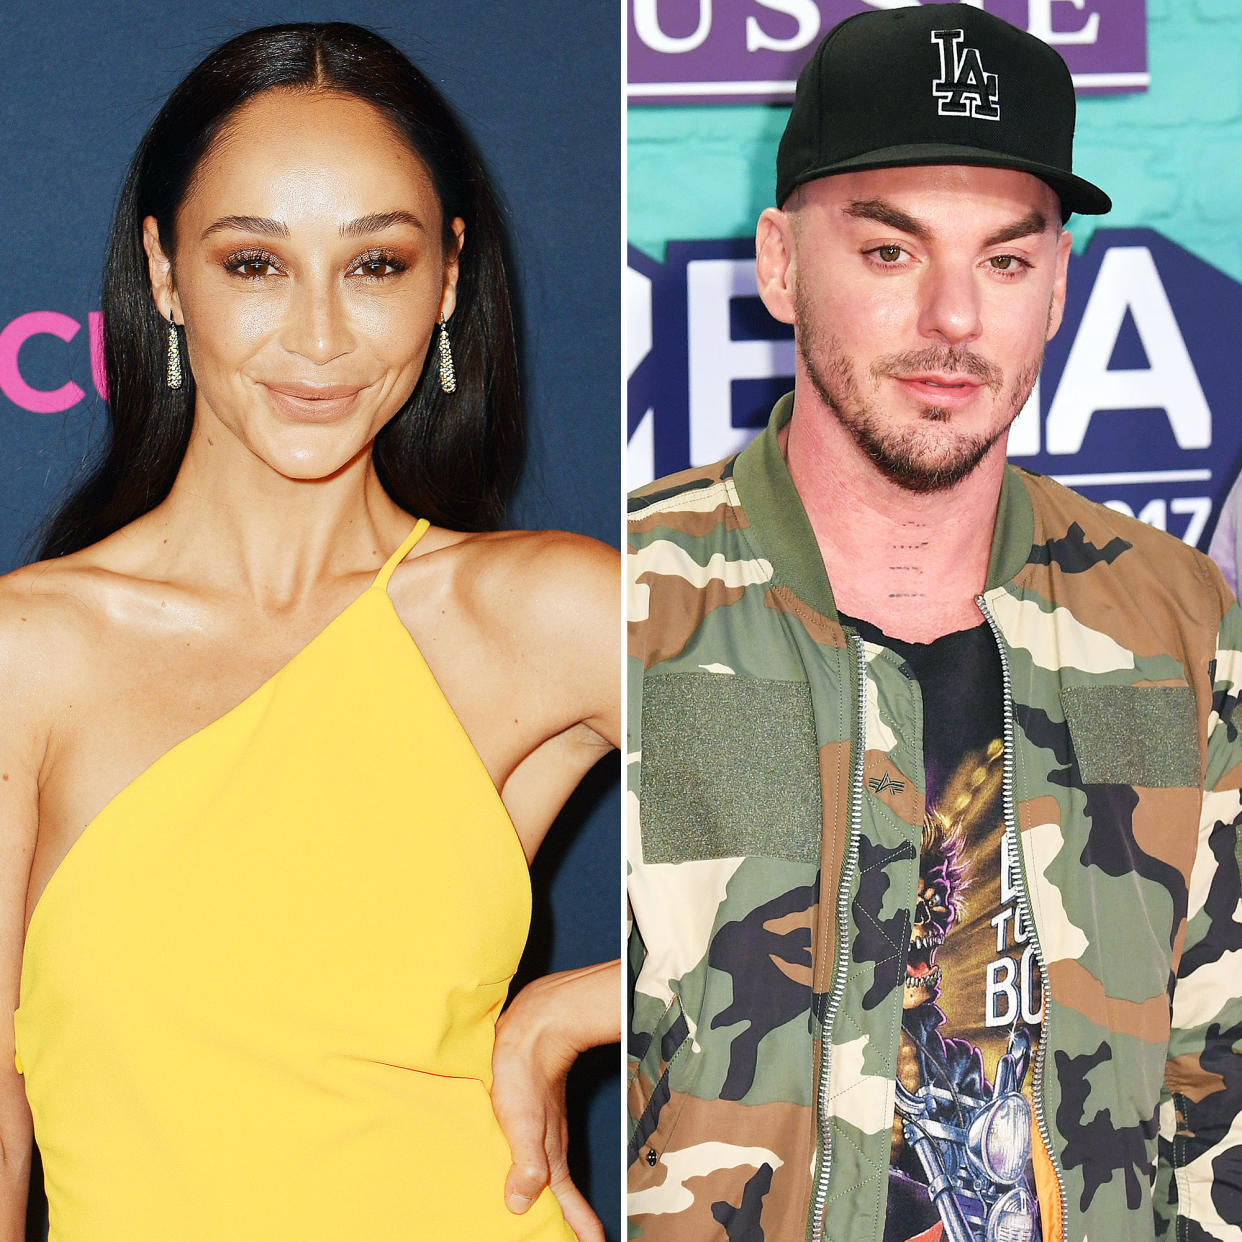 Cara Santana Is Dating Thirty Seconds to Mars Shannon Leto After Jesse Metcalfe Split